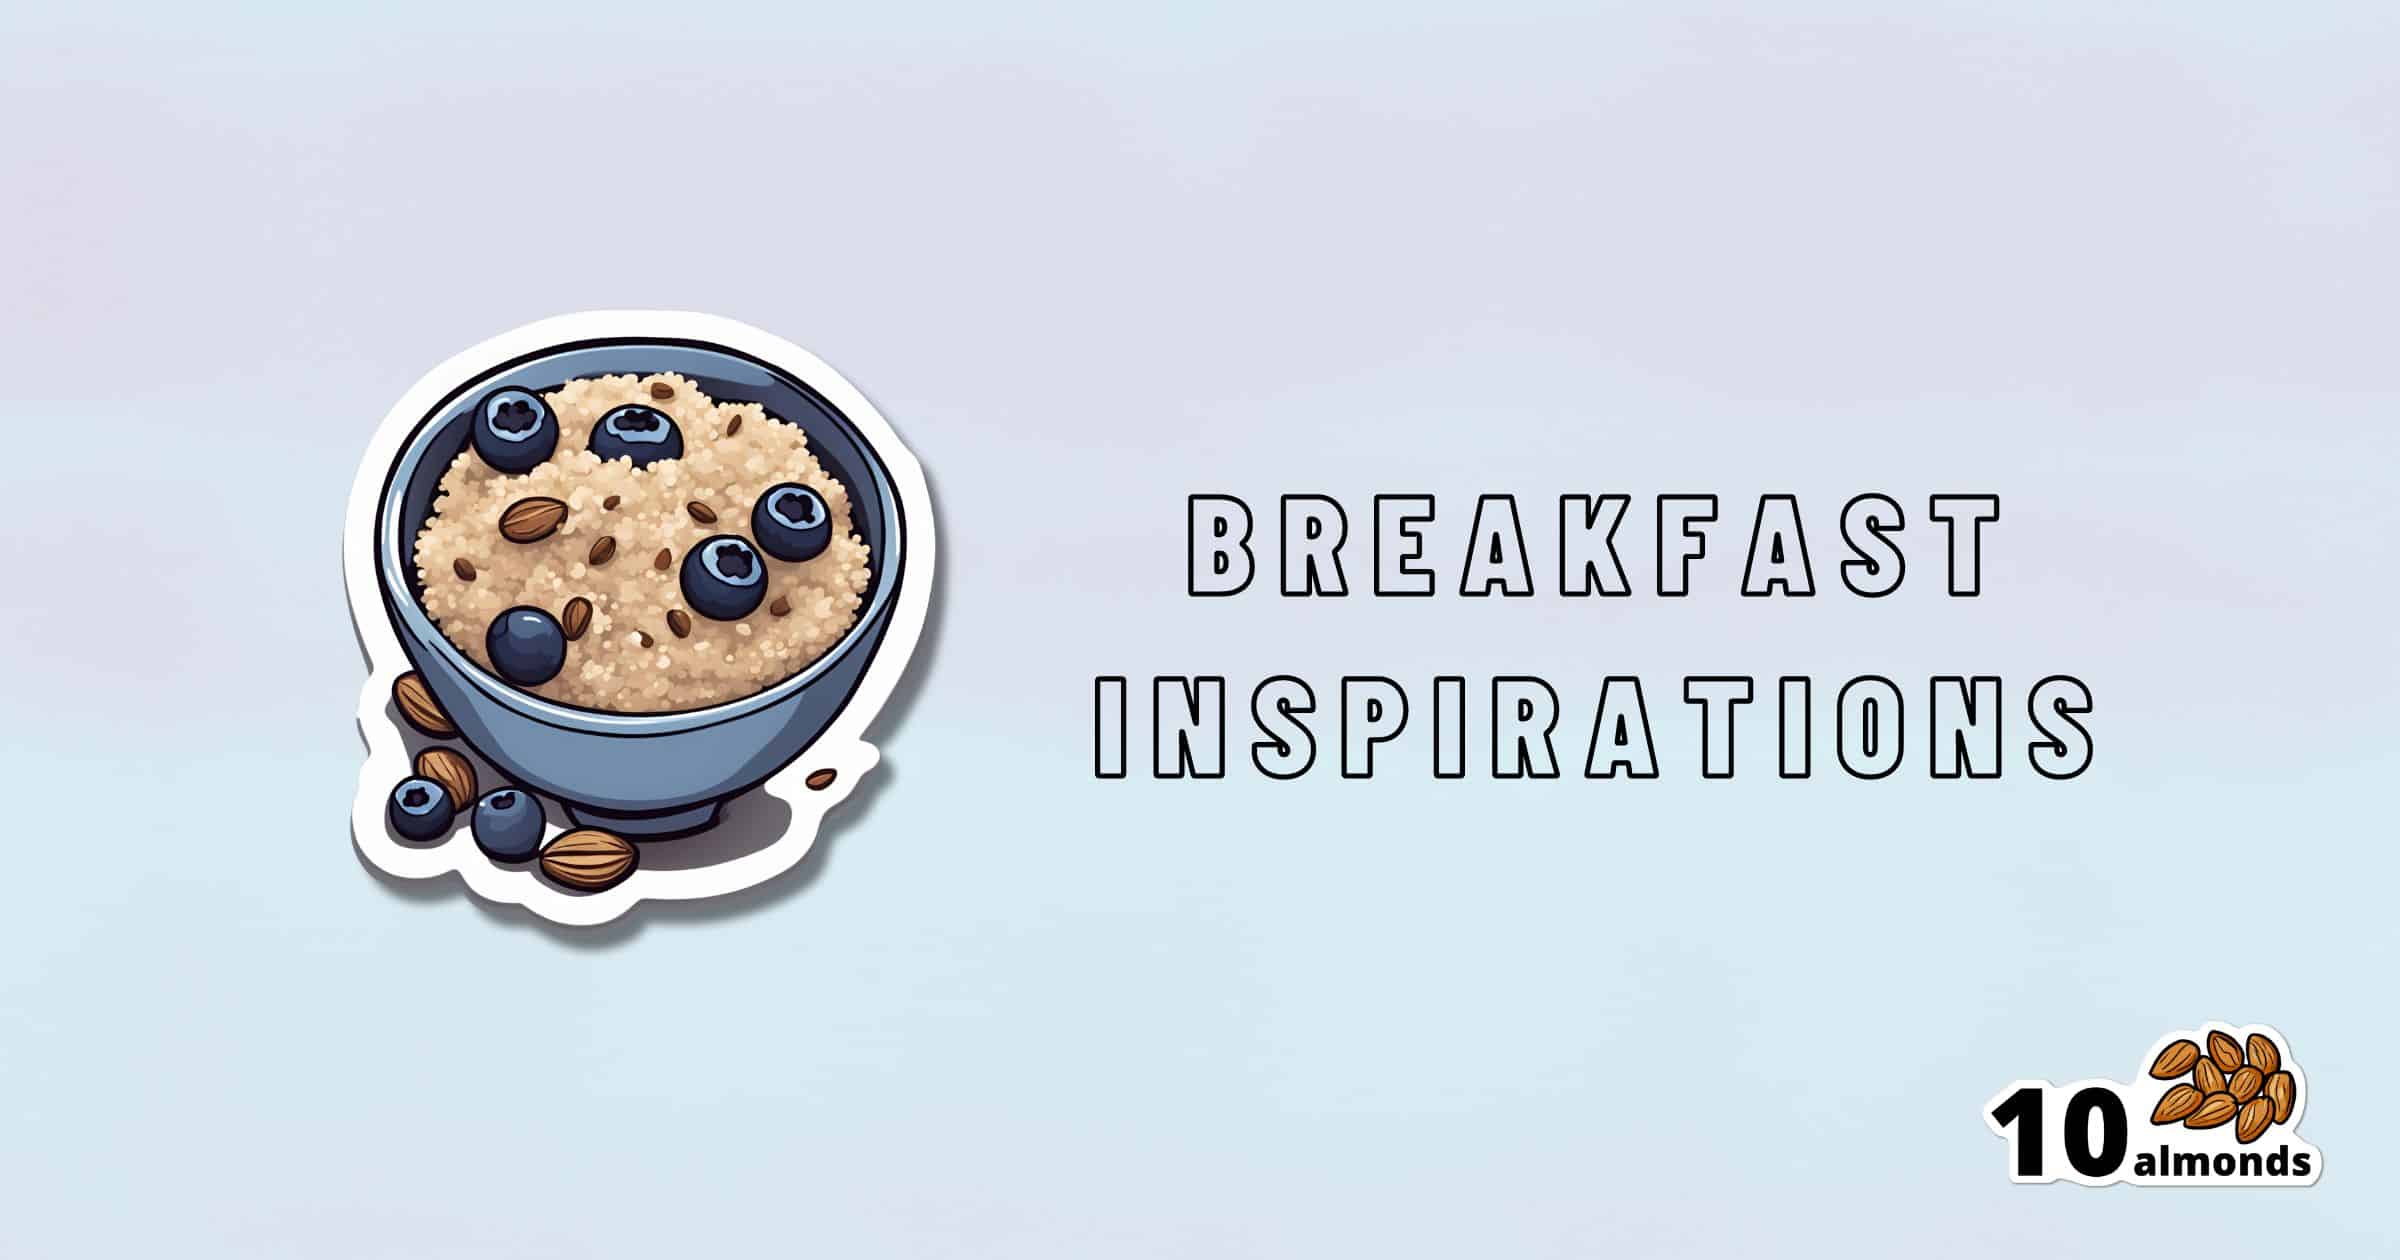 Image of a bowl of oatmeal topped with blueberries and almonds. The text "BREAKFAST INSPIRATIONS" appears to the right of the bowl. In the lower right corner, there are 10 almonds and the word "almonds" next to an image of almonds. Enjoy one of the healthiest breakfasts perfect to eat in the morning!